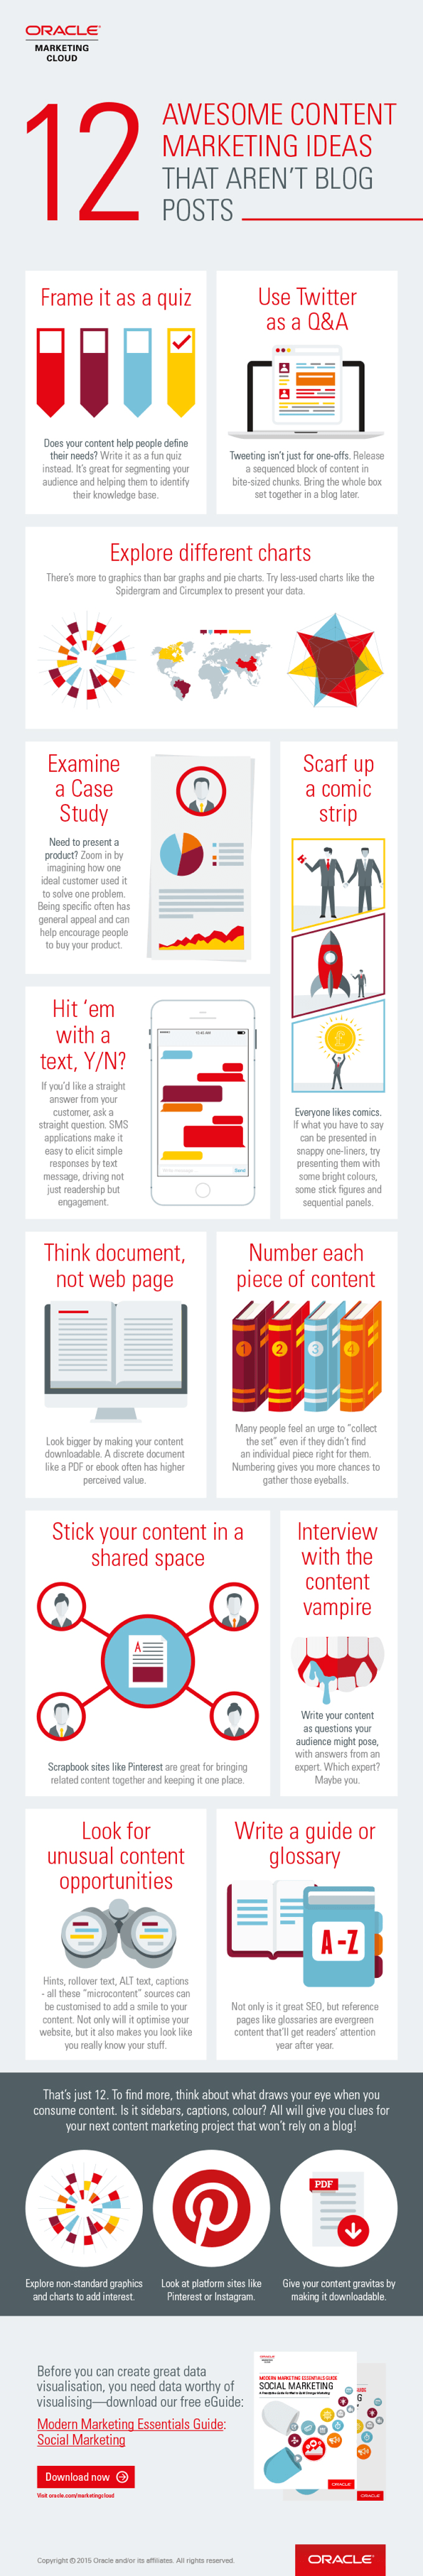 12 Great Content Marketing Ideas That Aren't Blog Posts Infographic Image